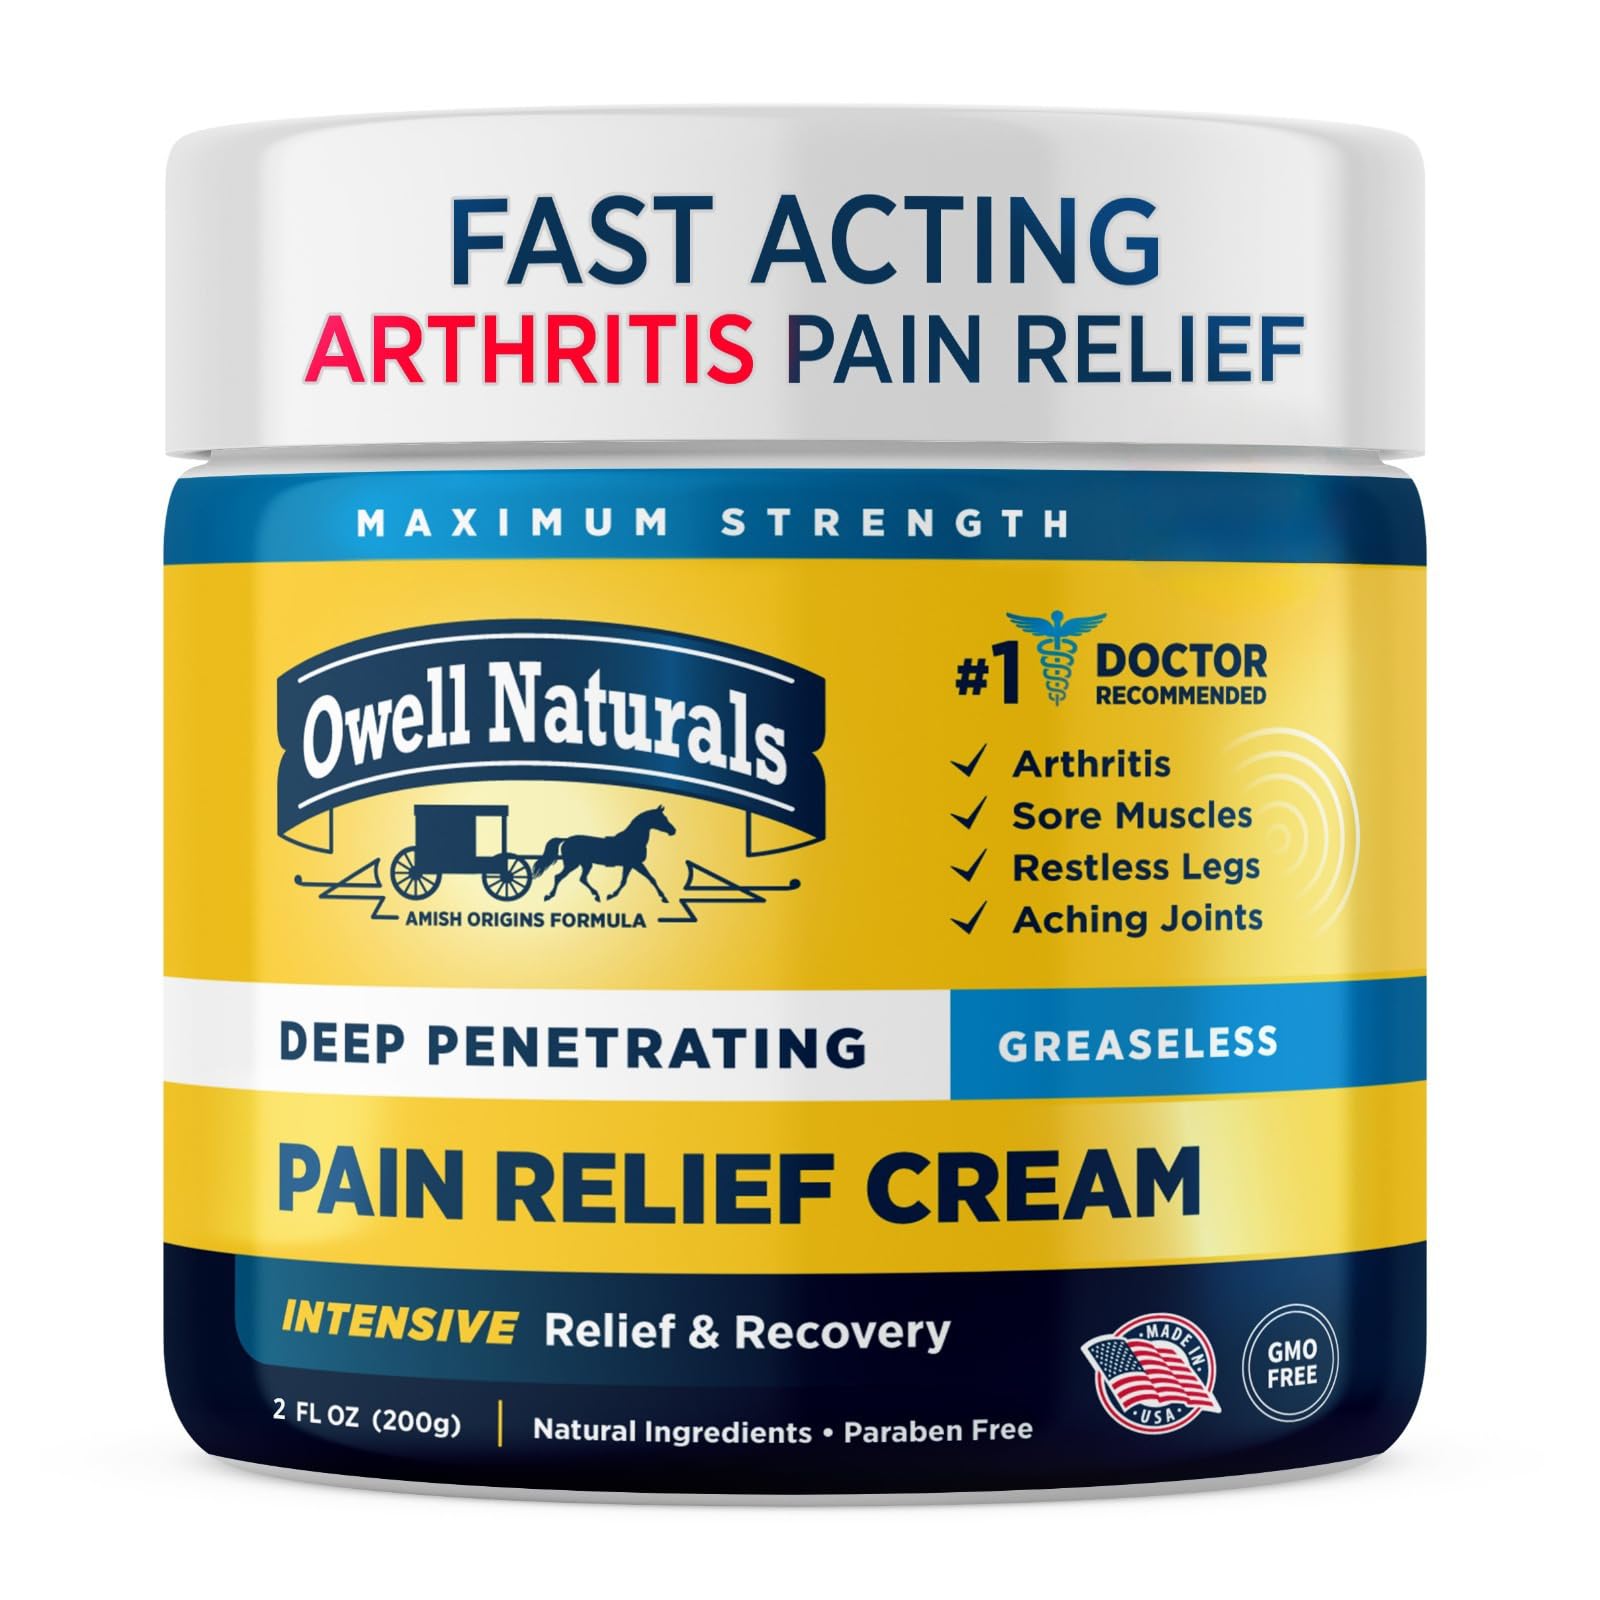 OWELL NATURALS Arthritis Pain Relief Cream 2 oz, Maximum Strength Deep Penetrating Relieving for Aches, Neuropathy, Joint, Muscl